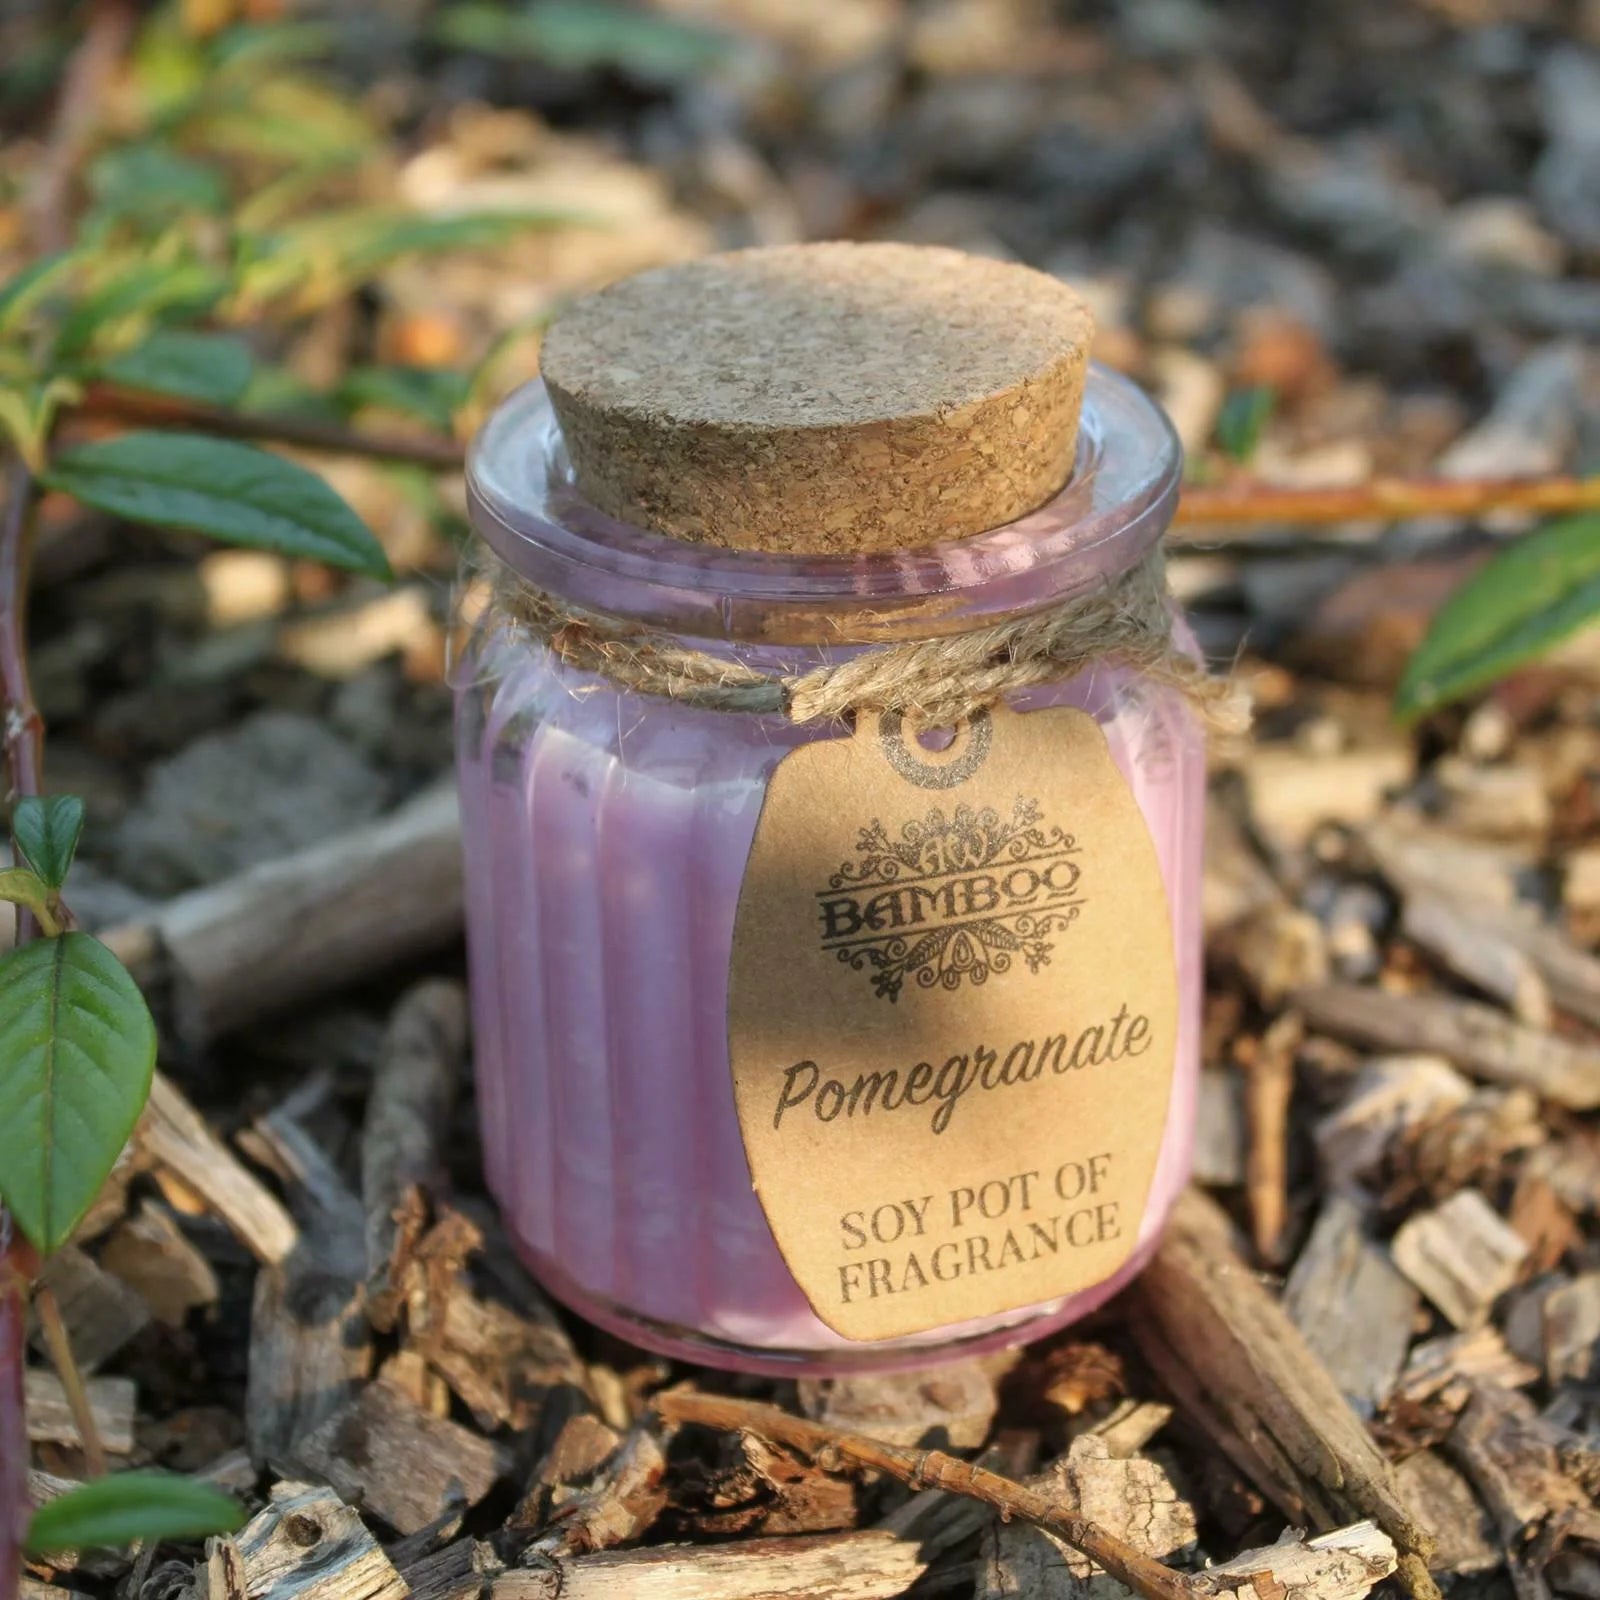 Pomegranate Soy Pot Of Fragrance Candles - Ancient Wisdom